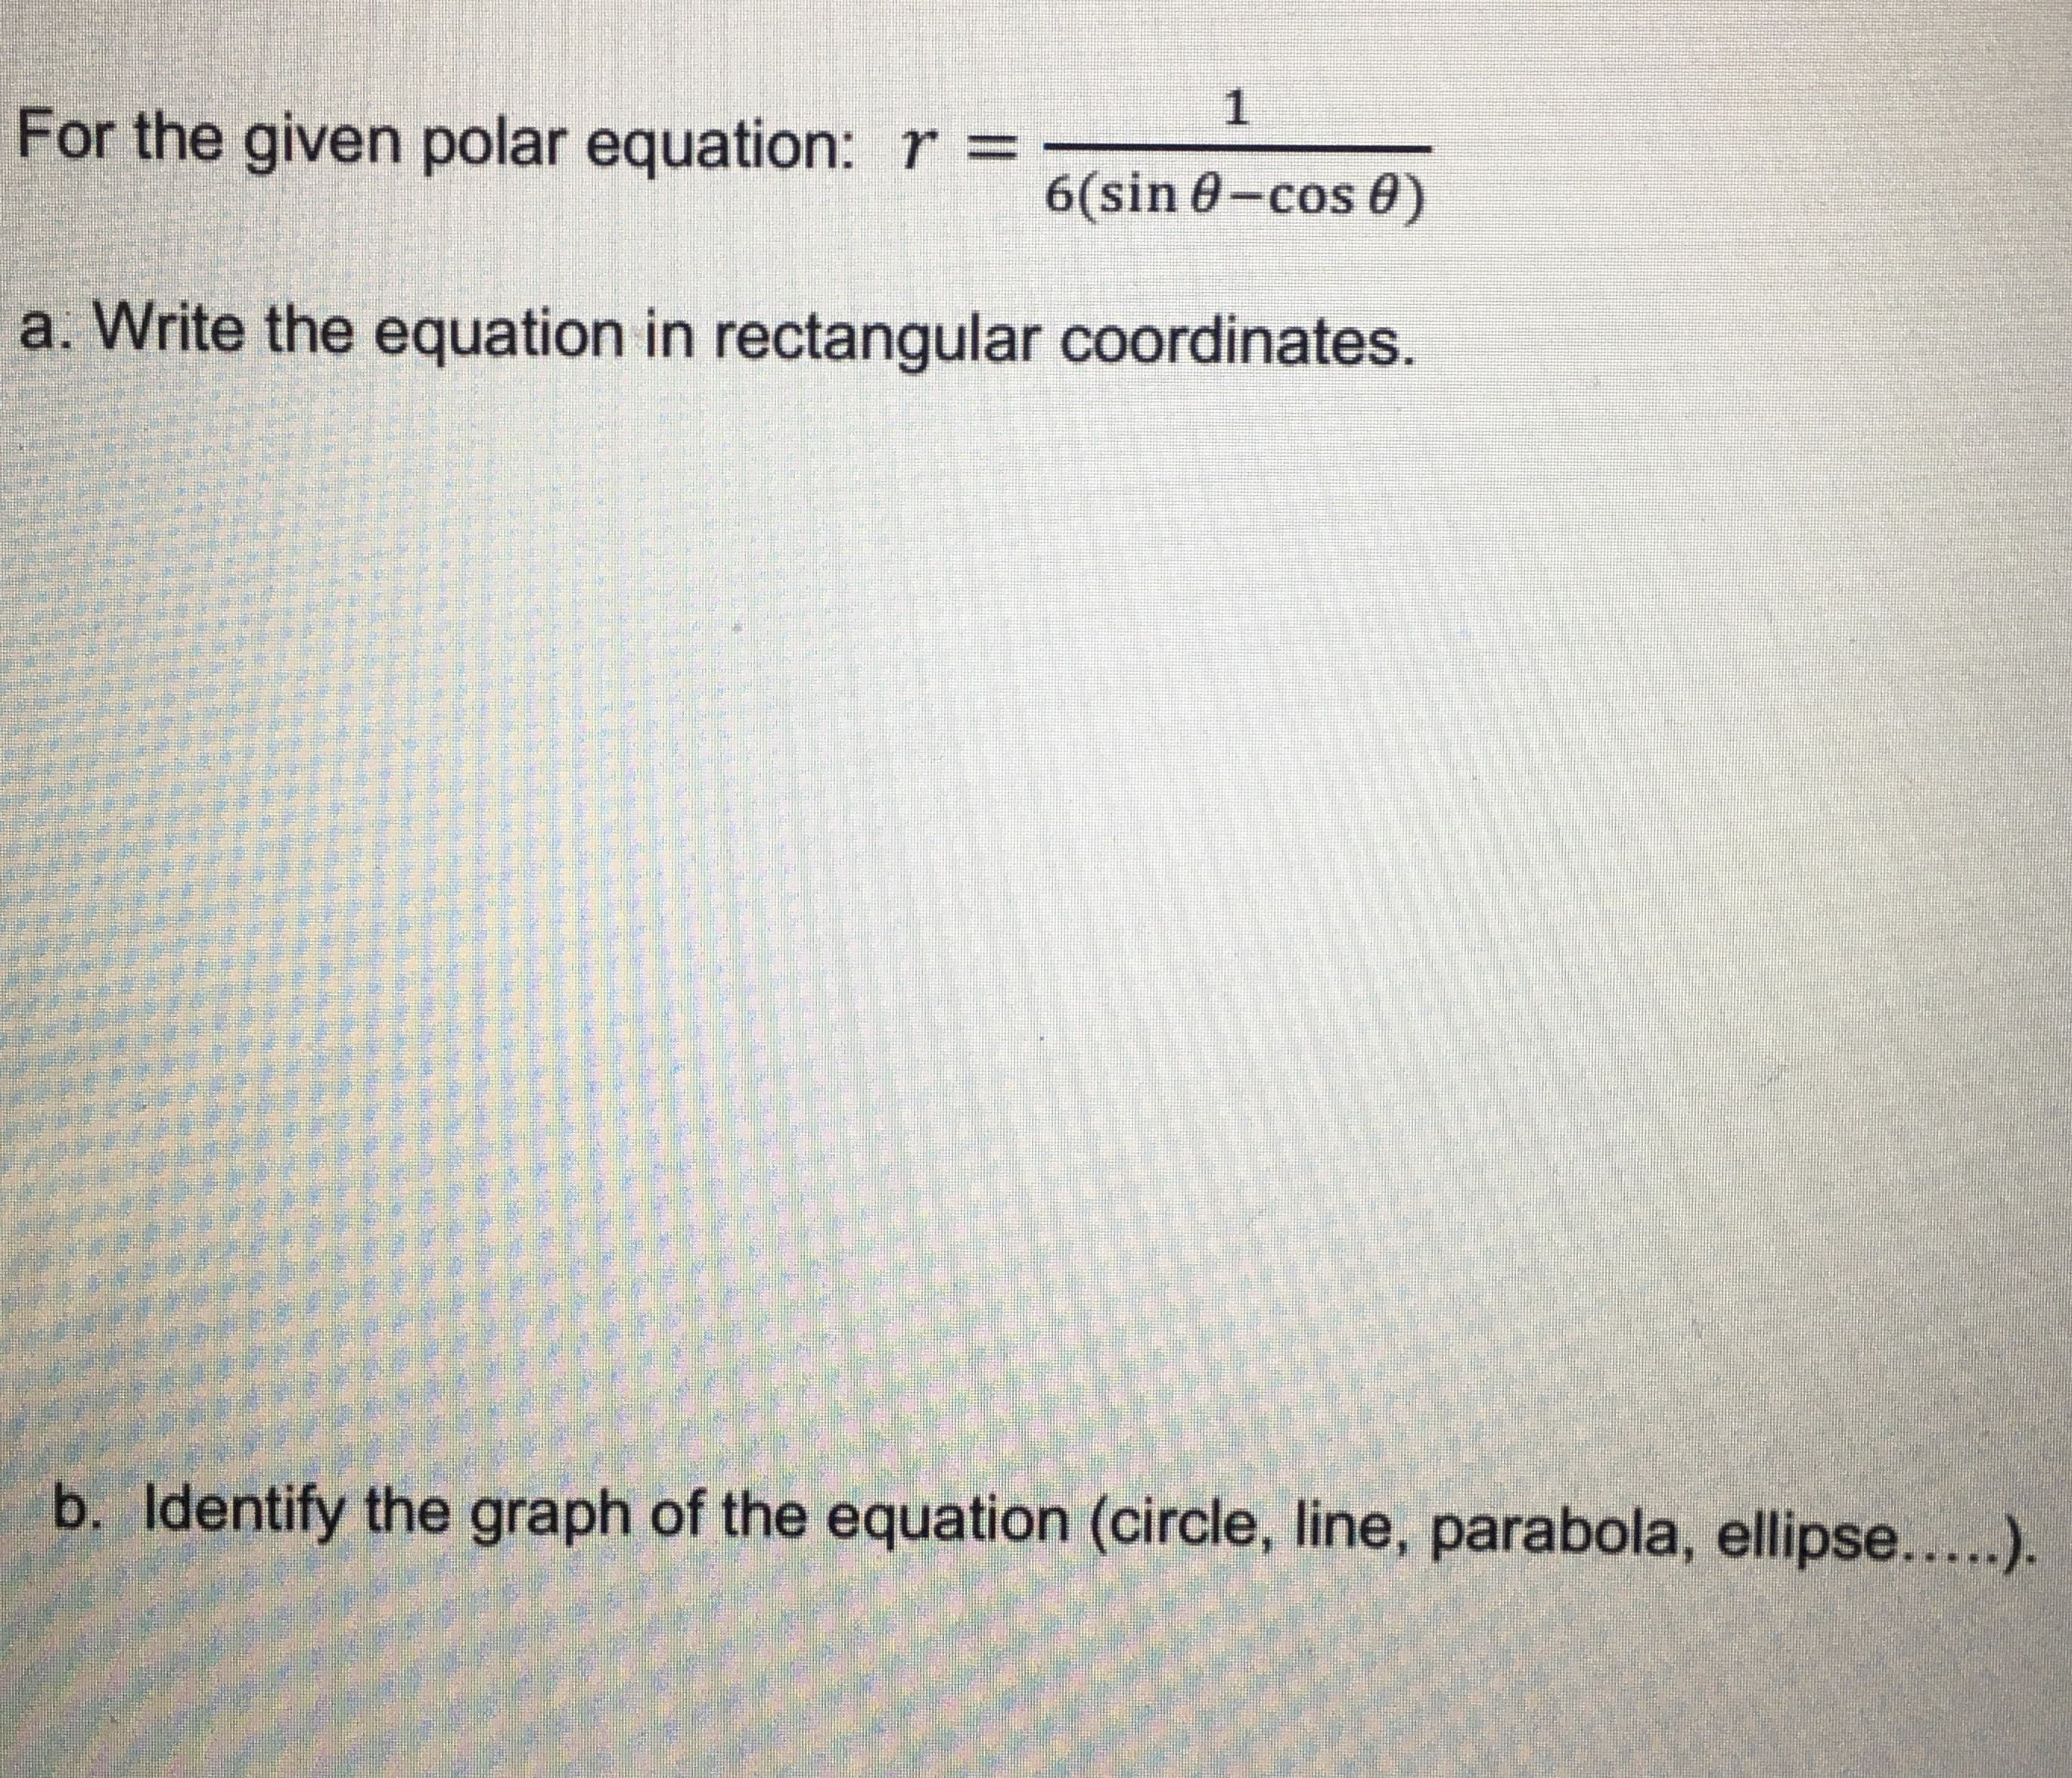 1
For the given polar equation: r =
6(sin 0-cos 0)
a. Write the equation in rectangular coordinates.
